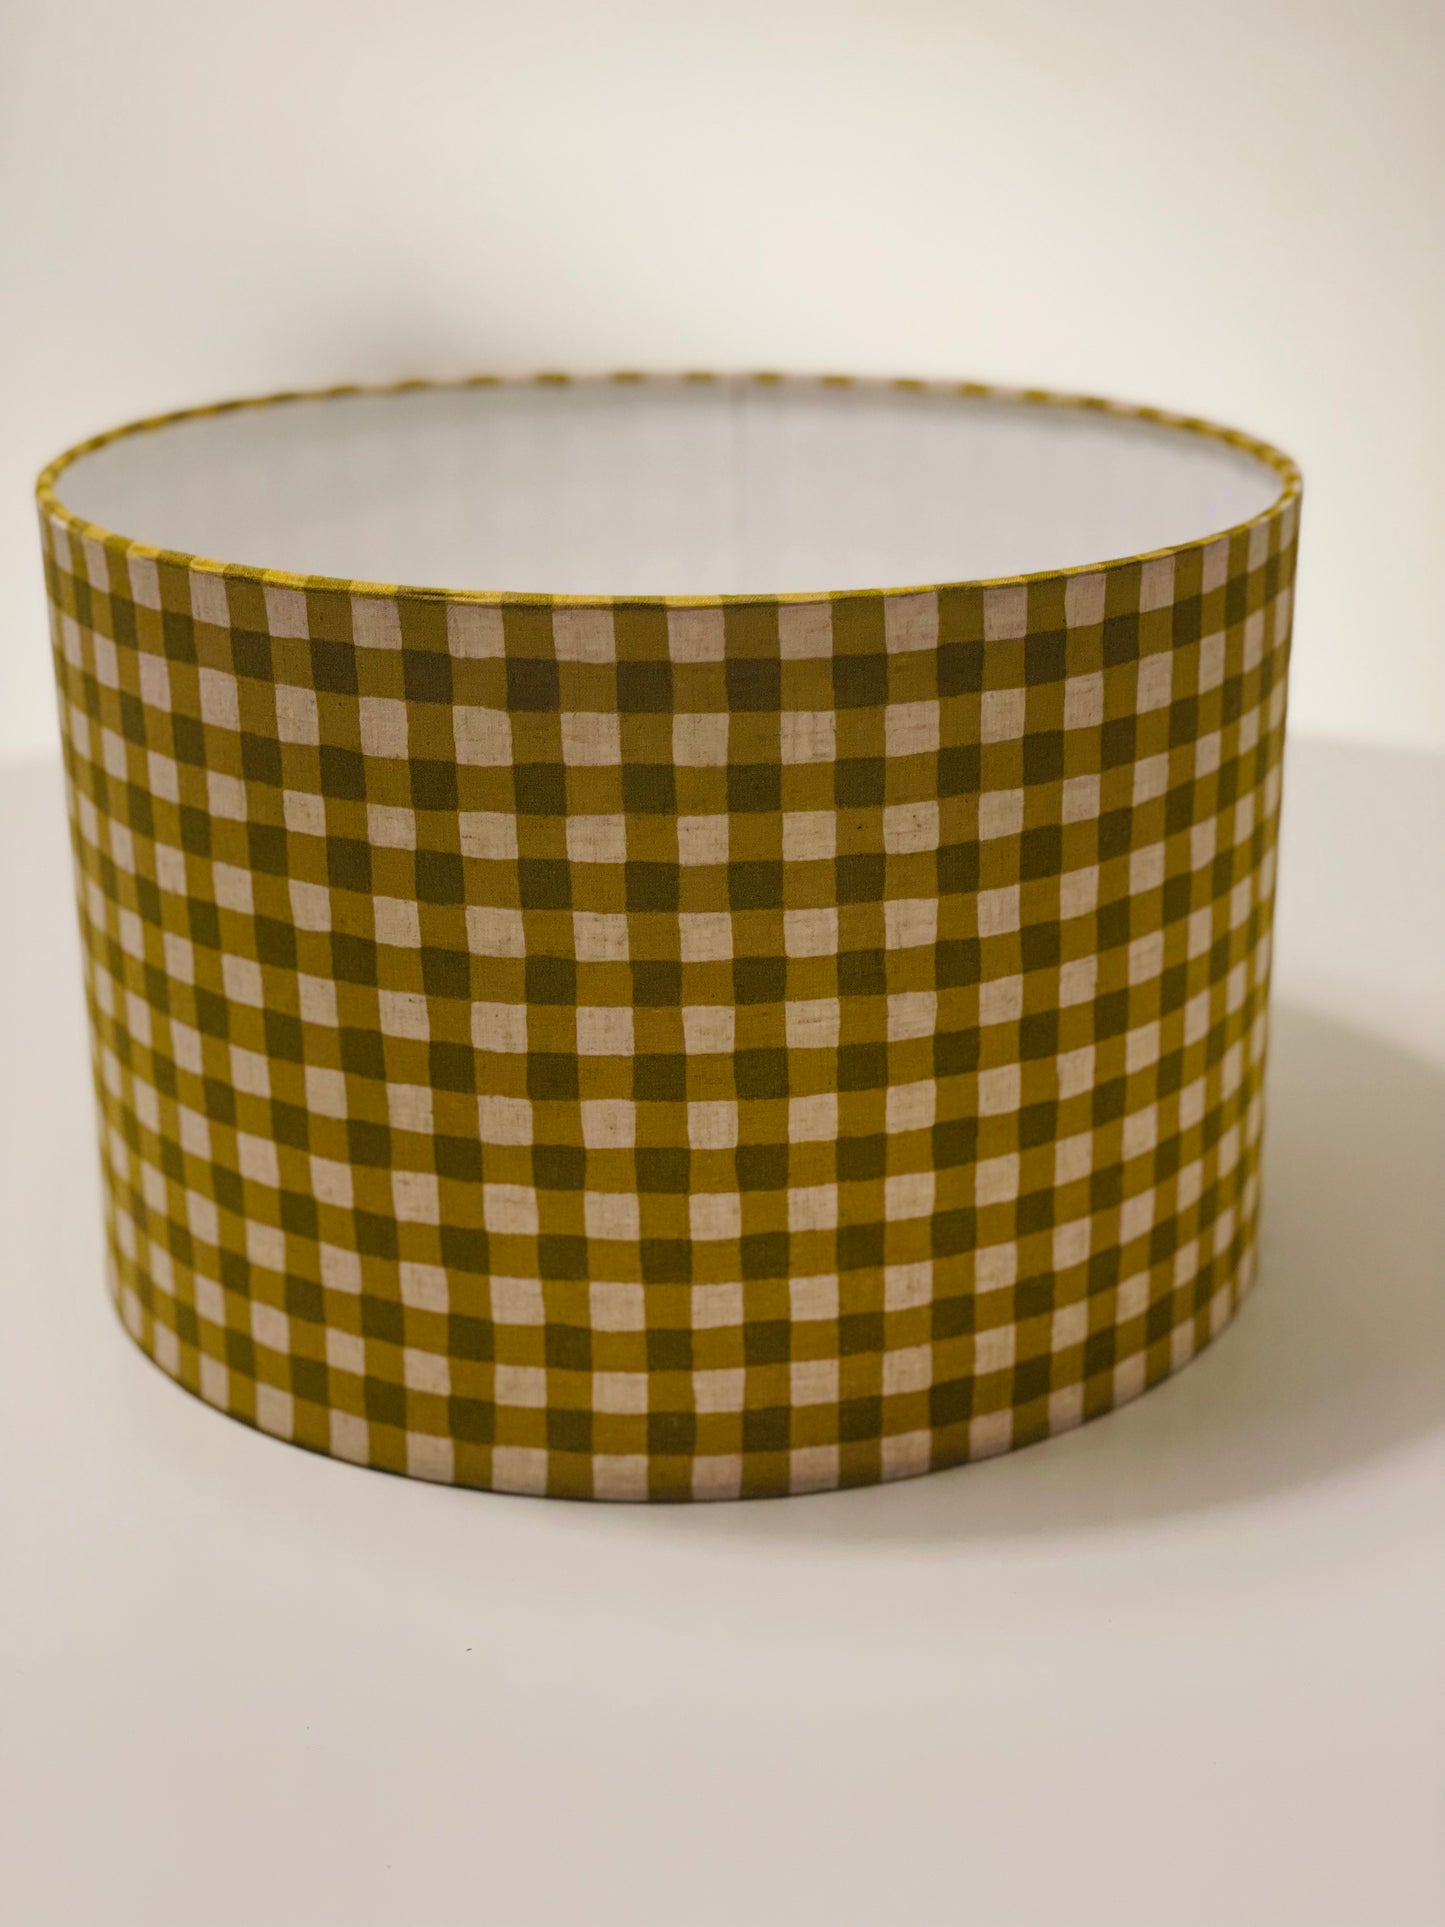 12 Inch Drum Shade. Yellow-Green Gingham Cotton-Linen from Japan.